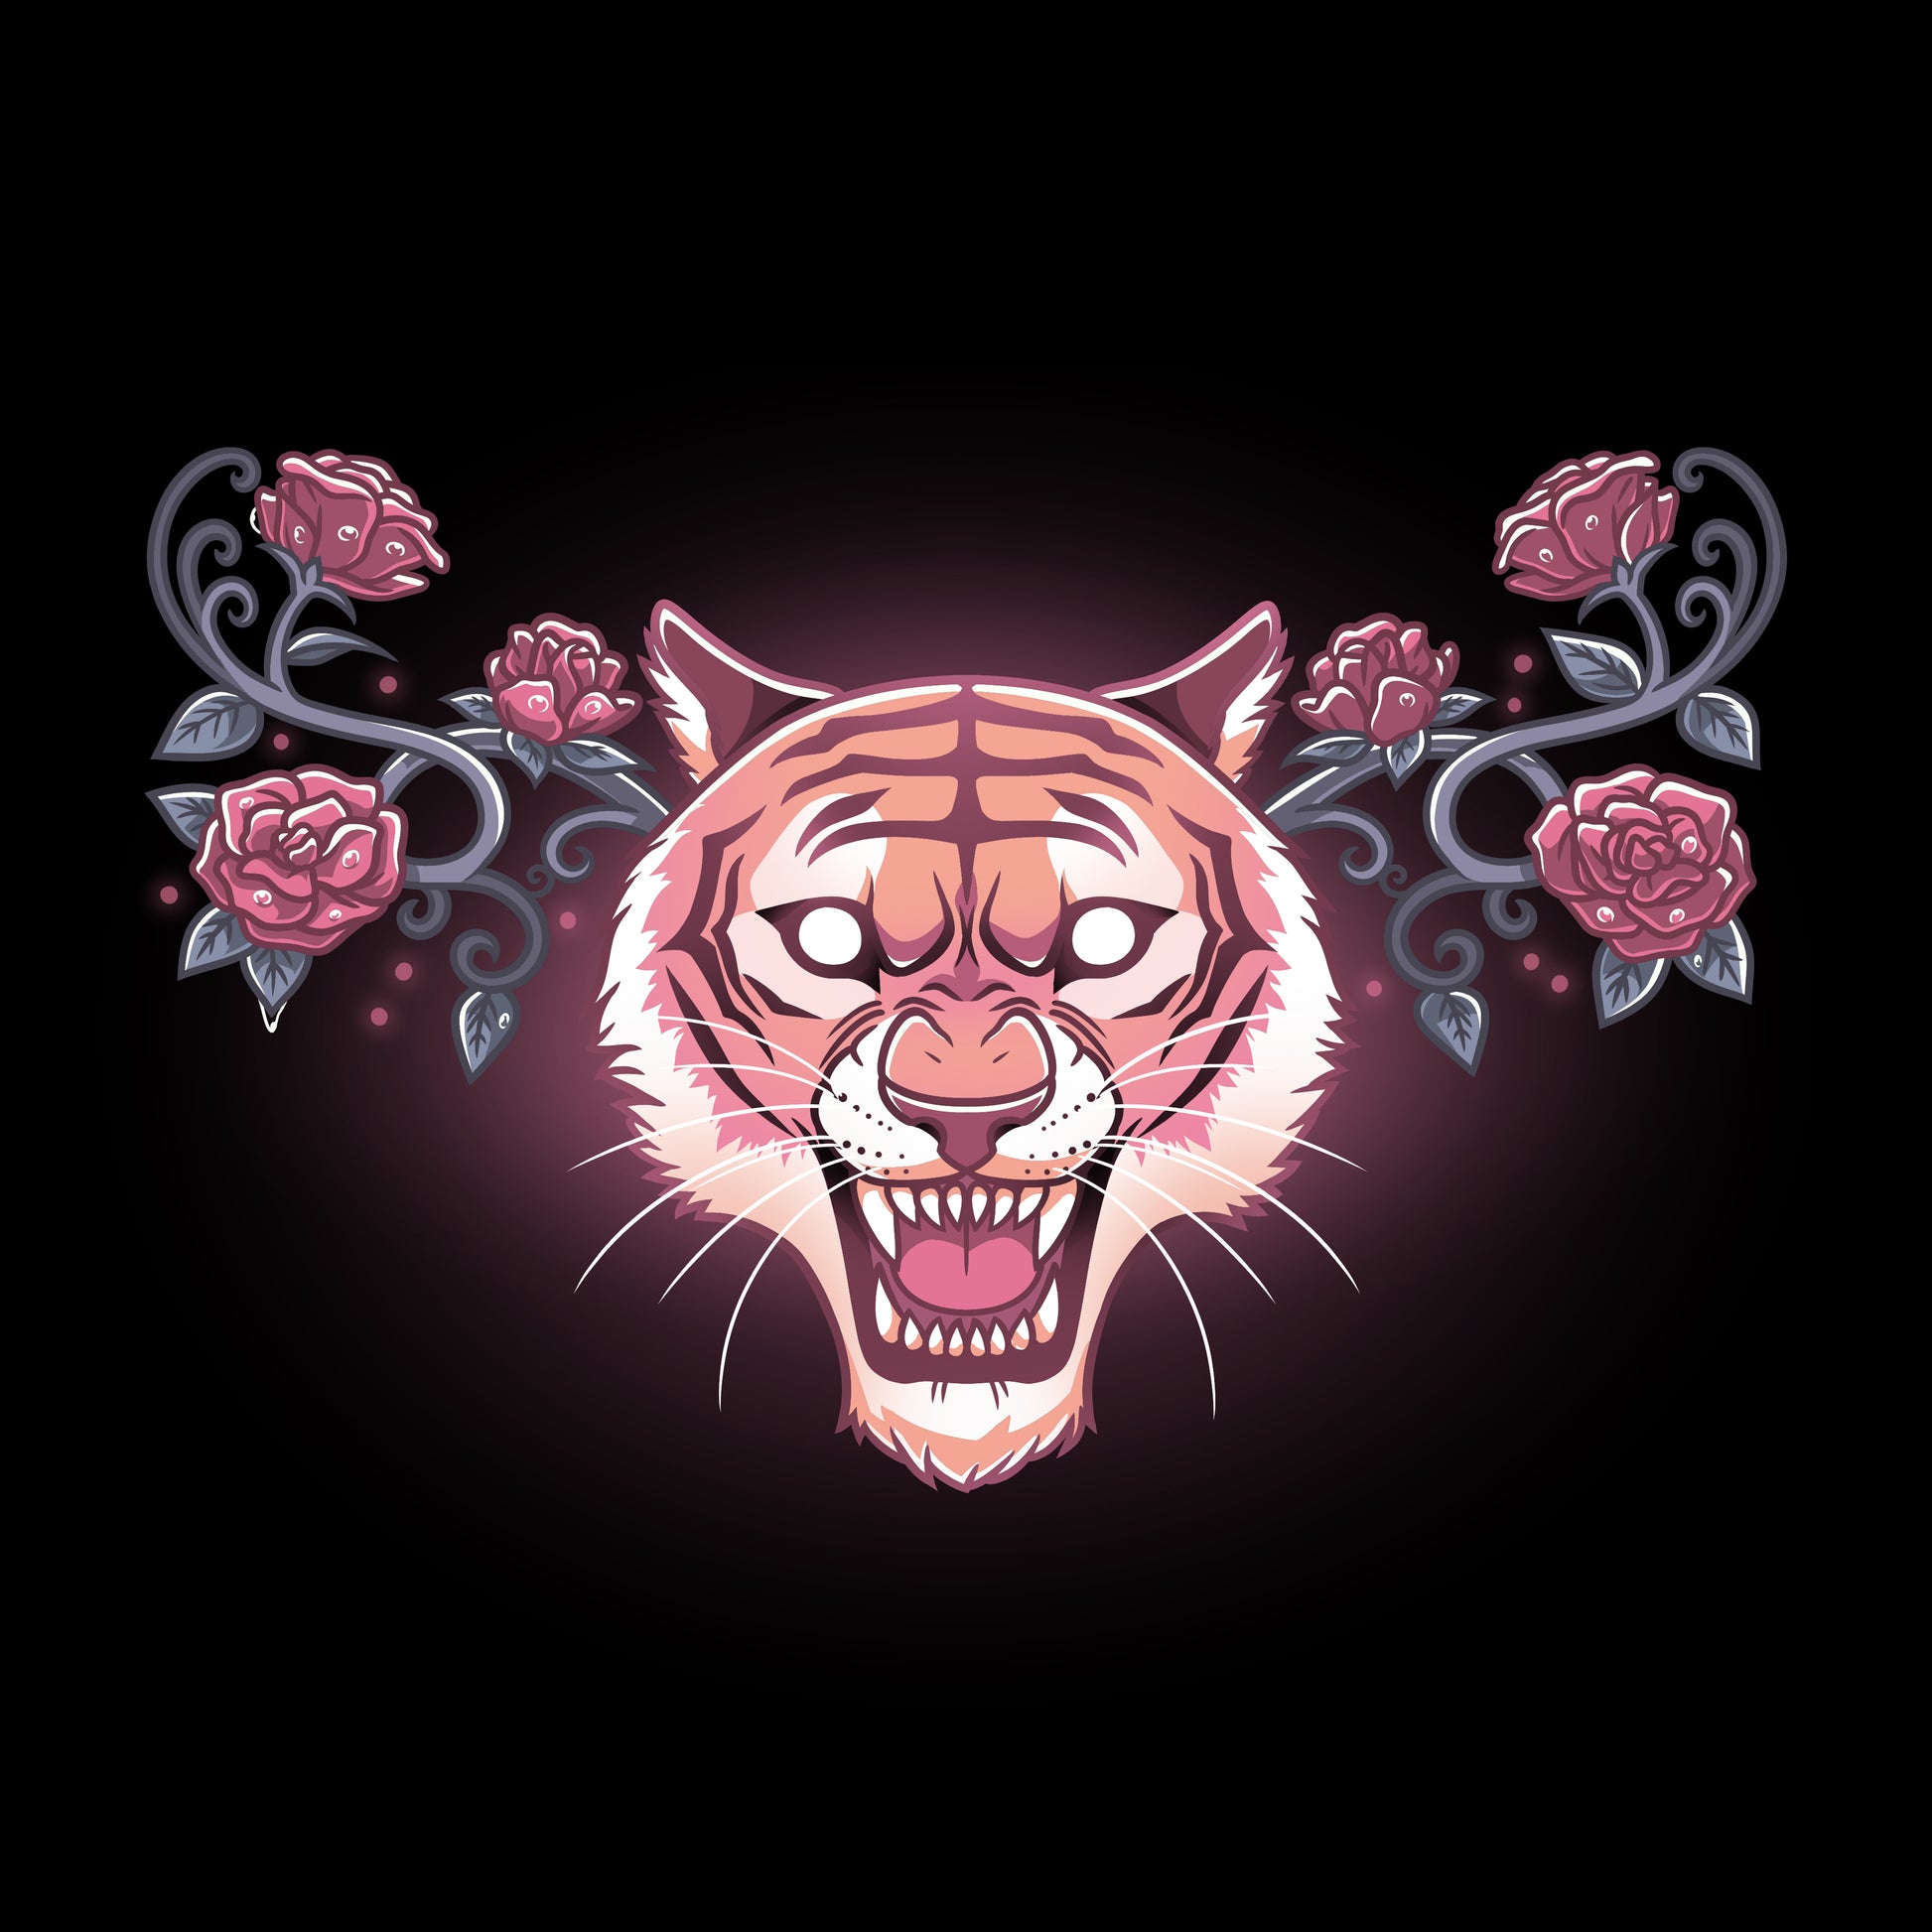 A Roar and Roses t-shirt design featuring a roaring tiger surrounded by roses. (Brand: TeeTurtle)